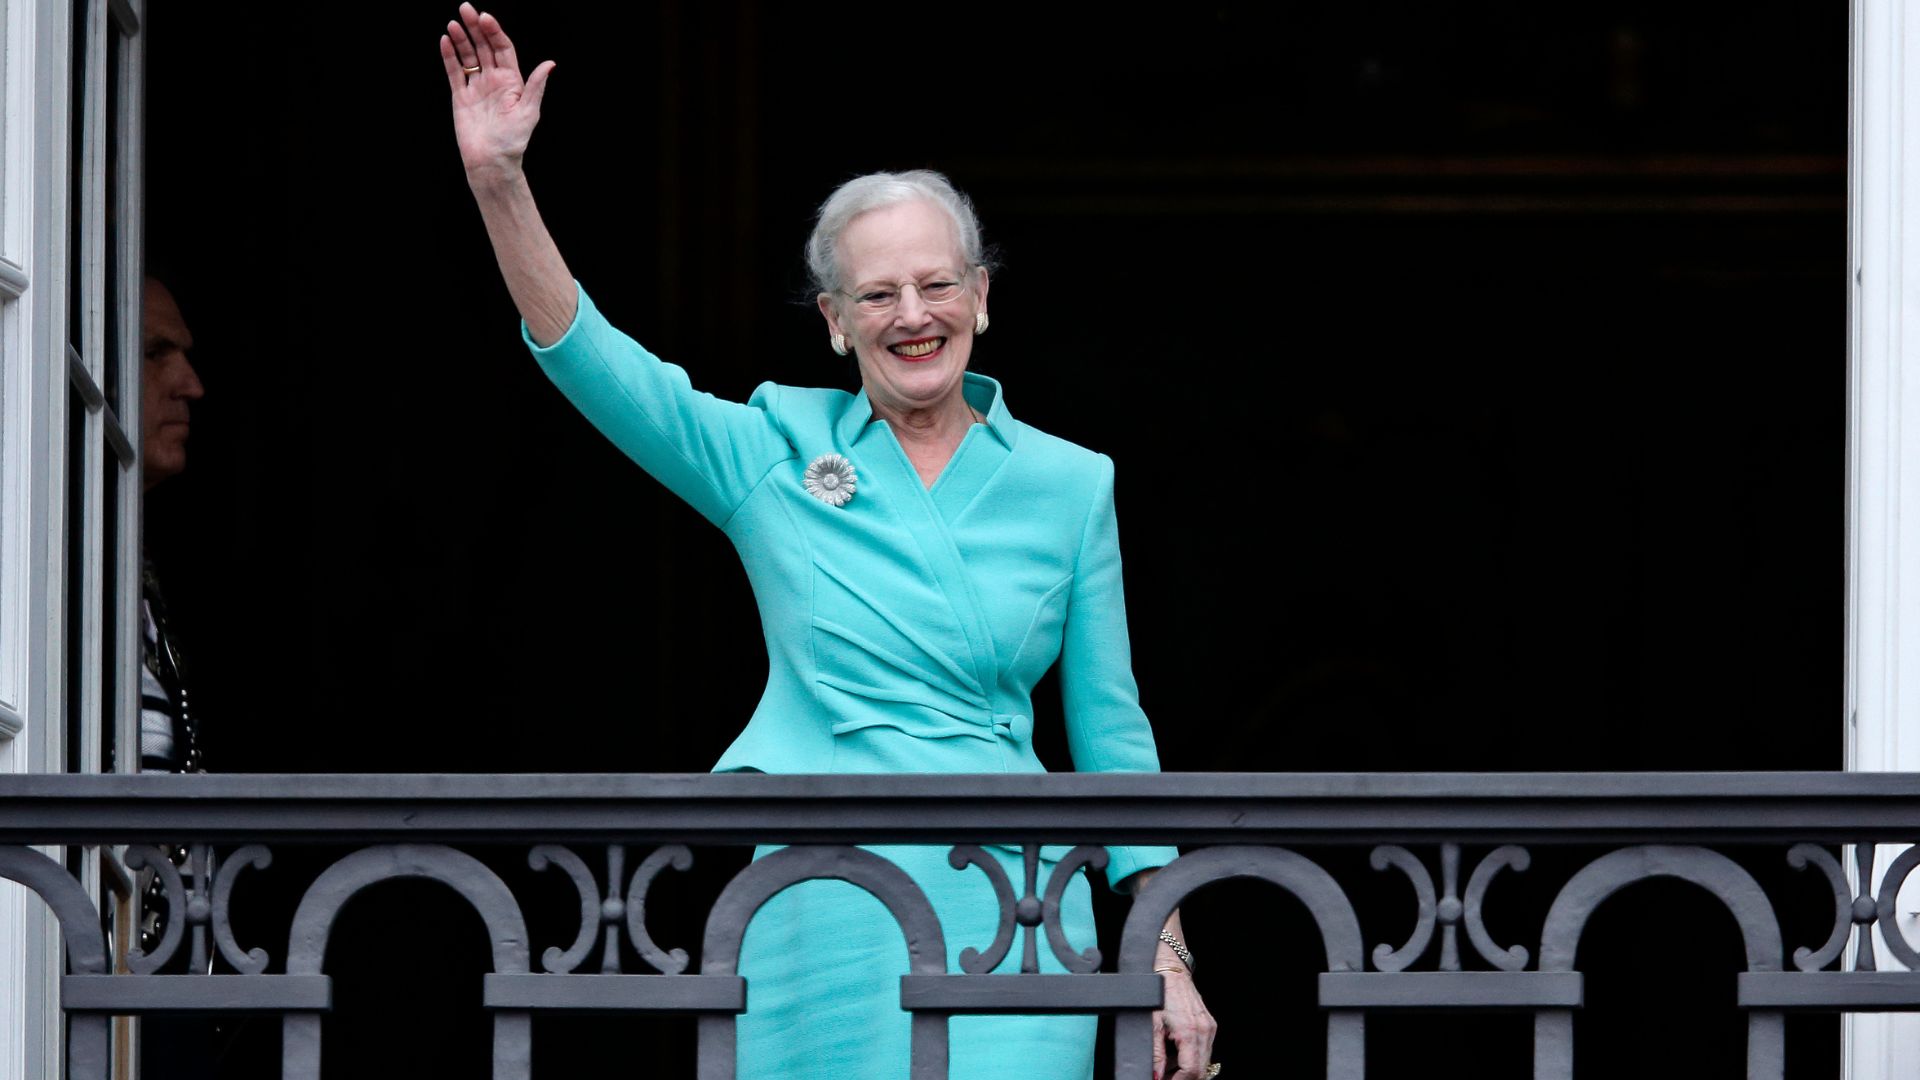 The Queen of Denmark, Margrethe II celebrates her 75th birthday at Christian VII's Palace, Amalienborg. /Jens Dresling/Polfoto/AP